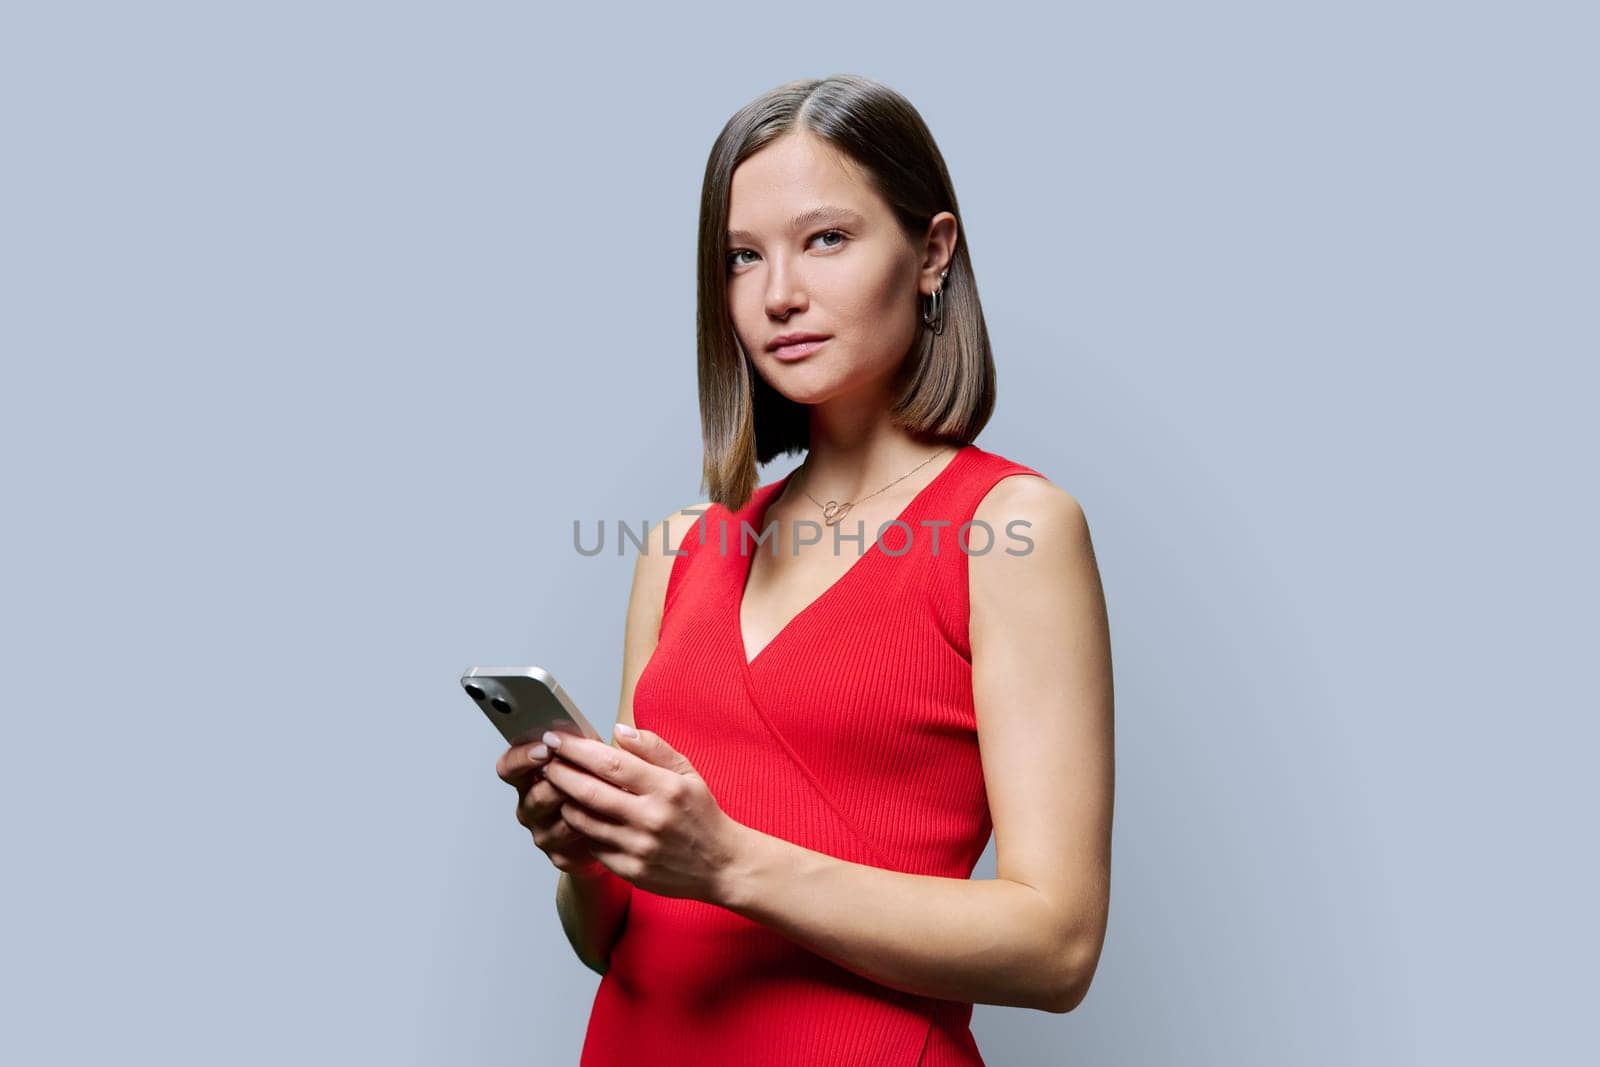 Young fashionable modern woman holding smartphone in hands, looking at camera on gray studio background. Technology, mobile applications, work leisure education lifestyle communication, youth people